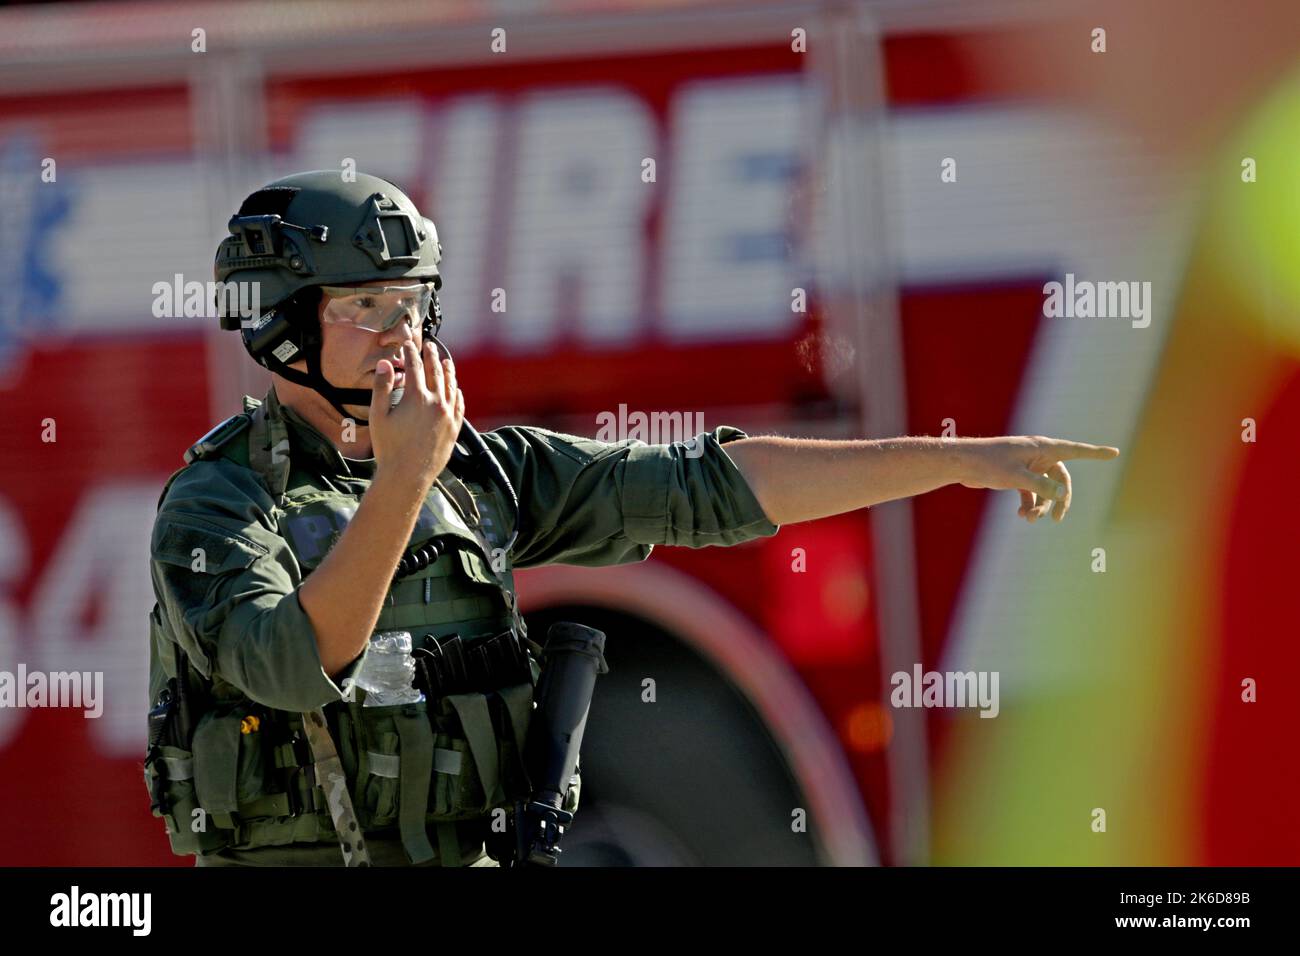 Parkland, USA. 14th Feb, 2018. A law enforcement officer directs traffic outside of Stoneman Douglas High School in Parkland, Fla., after a shooting at the school on February 14, 2018. (Photo by John McCall/Sun Sentinel/TNS/Sipa USA) Credit: Sipa USA/Alamy Live News Stock Photo